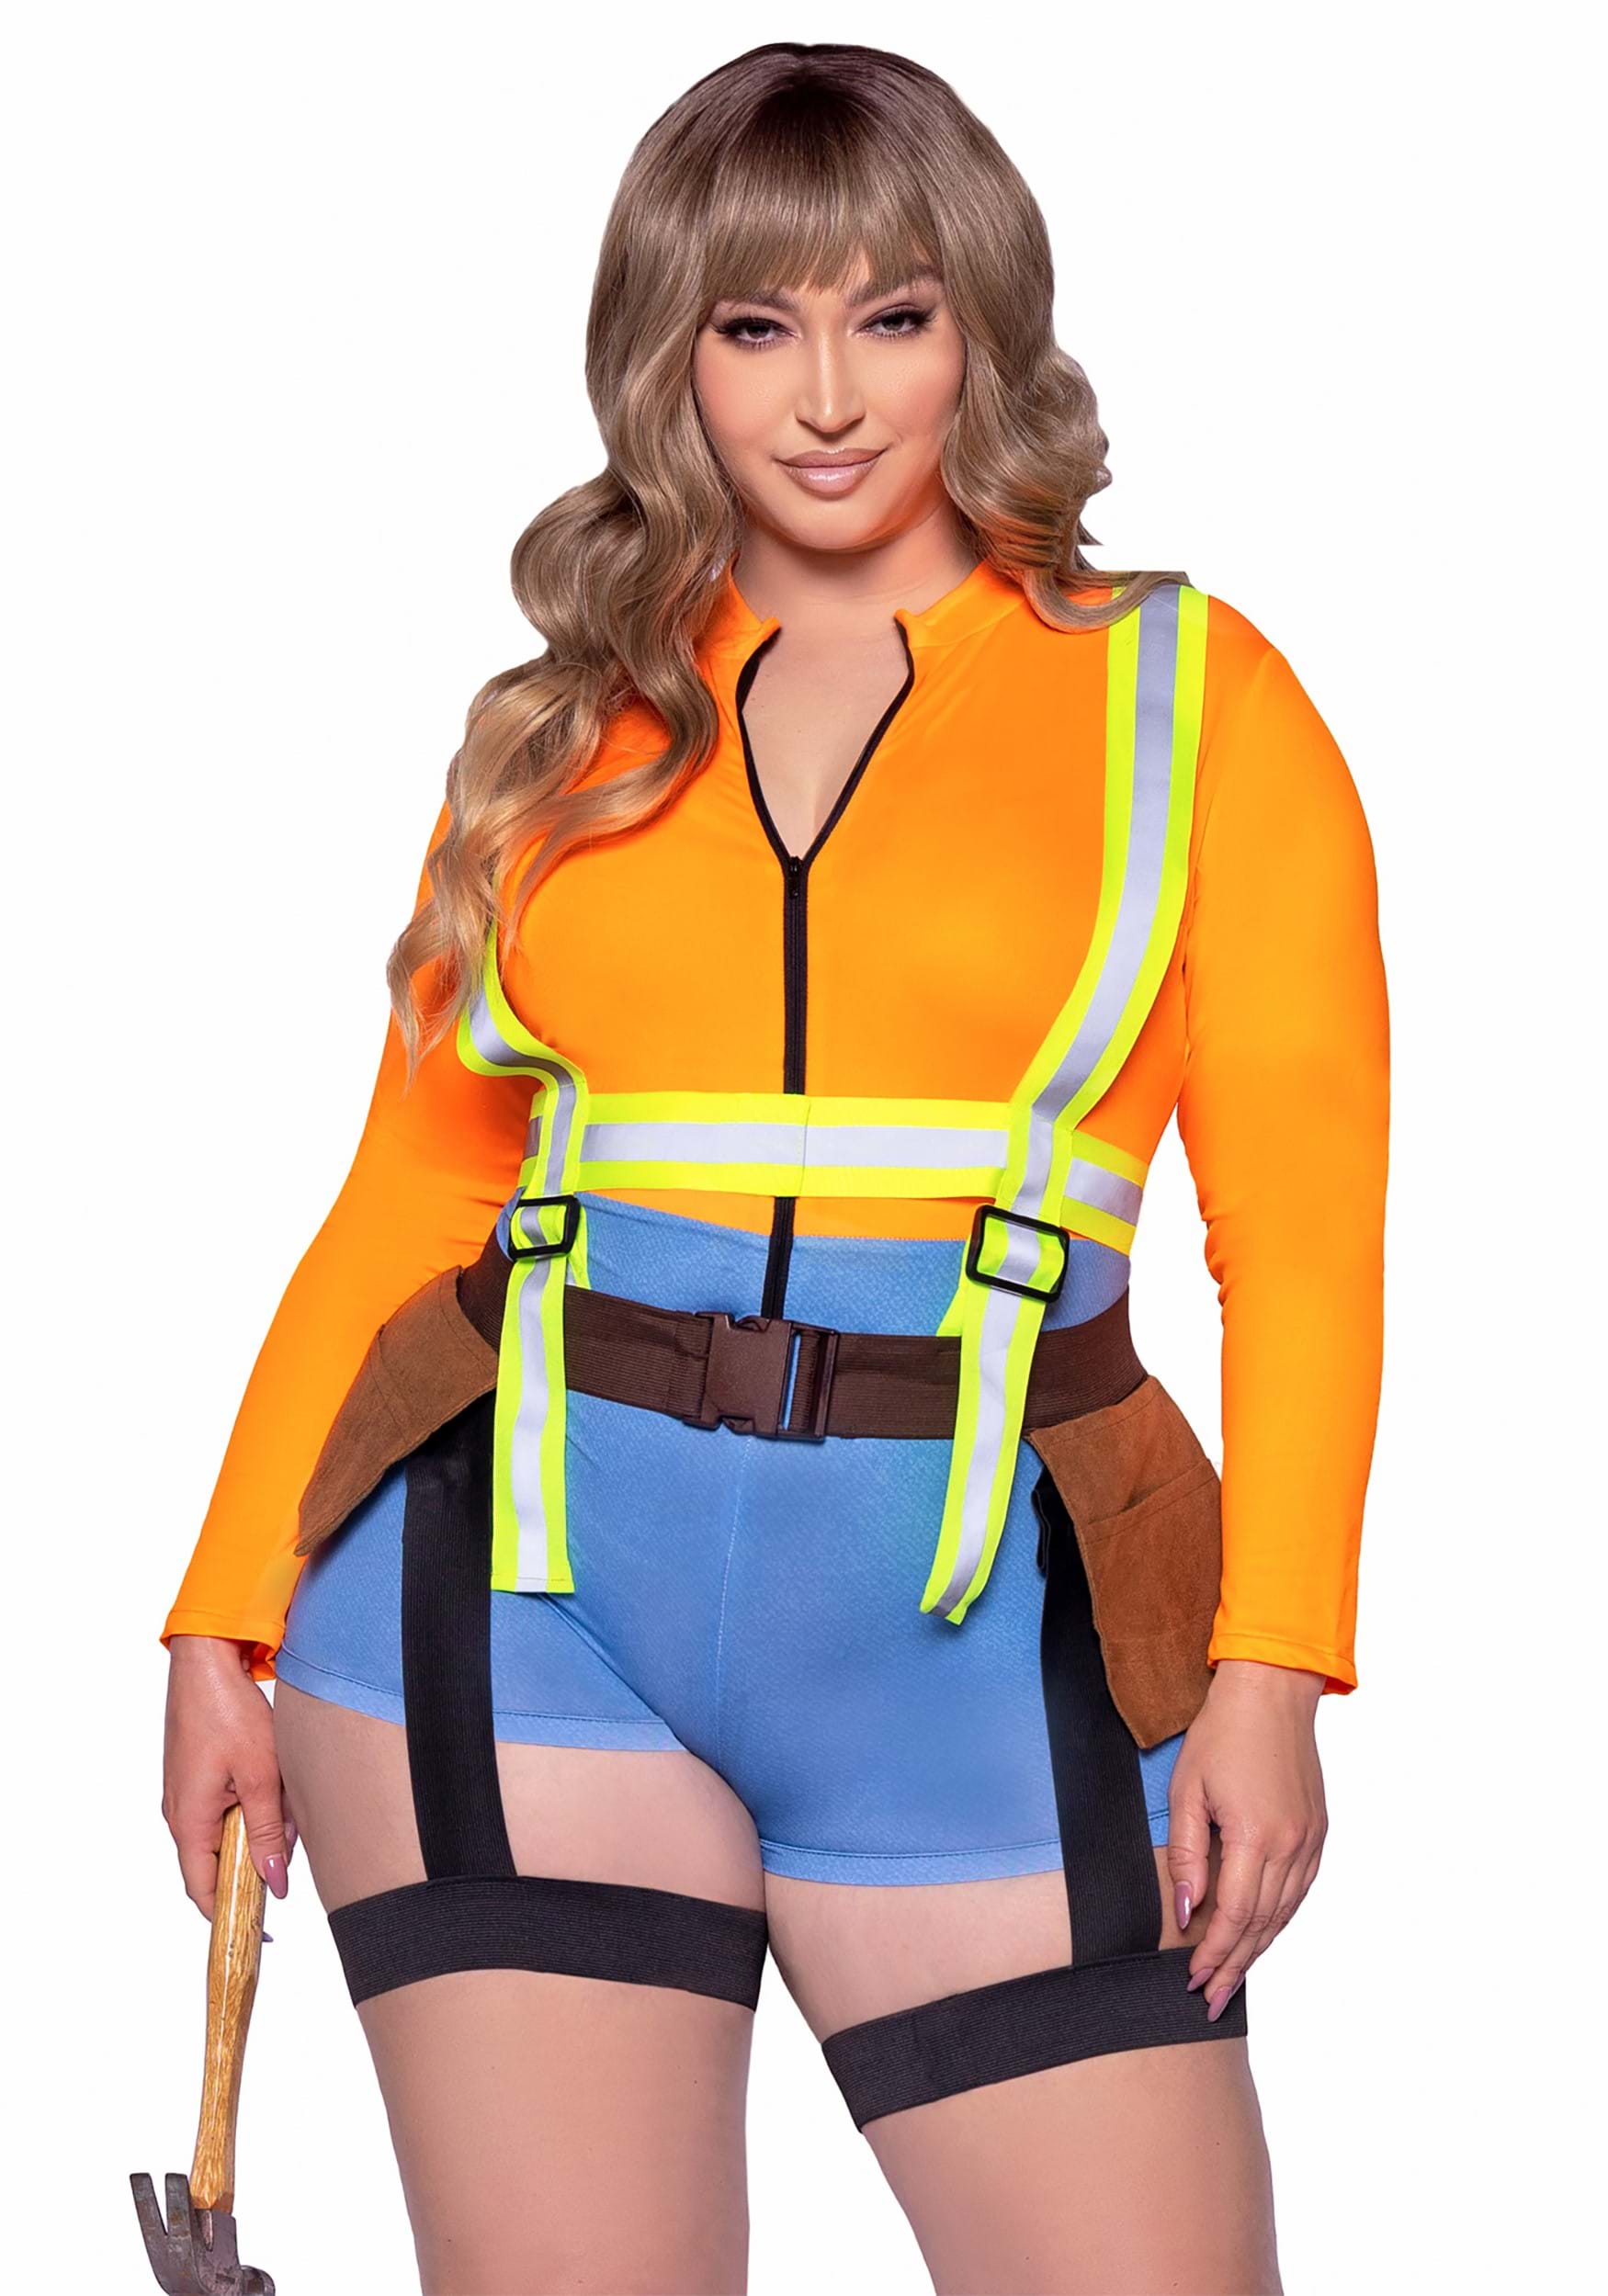 Women’s Plus Size Sexy Construction Worker Costume